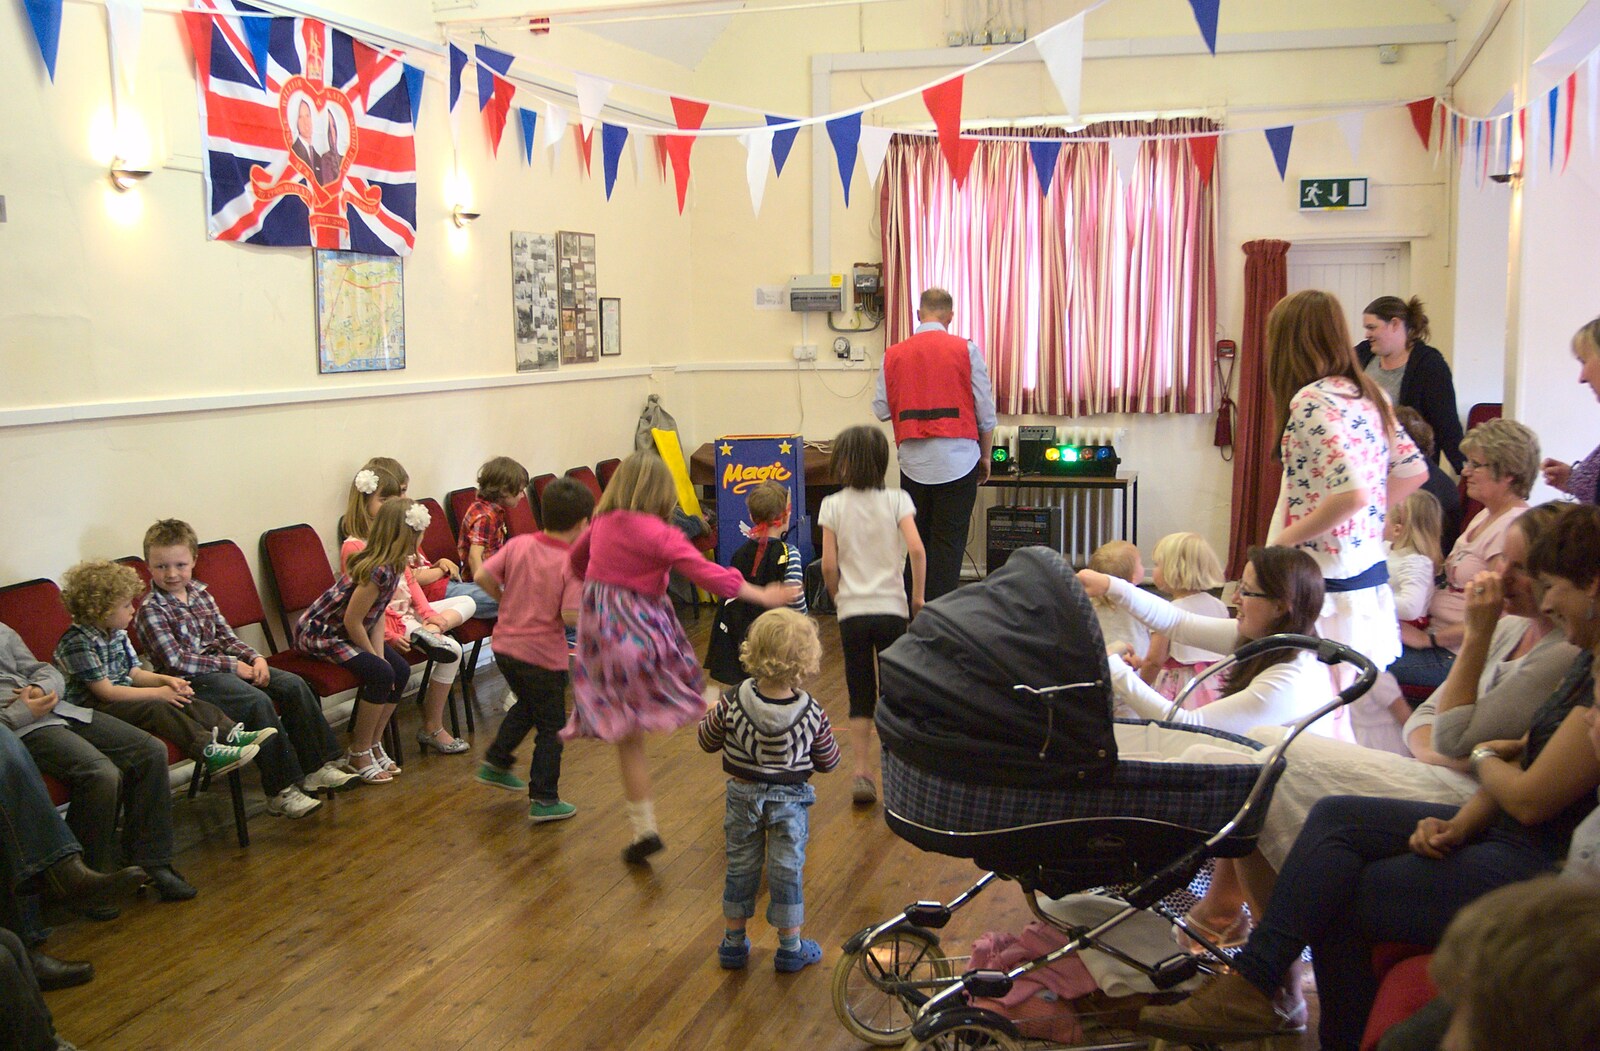 Annabel dances whilst Fred stands still from Charles and the Royal Wedding, Brome, Suffolk - 24th April 2011